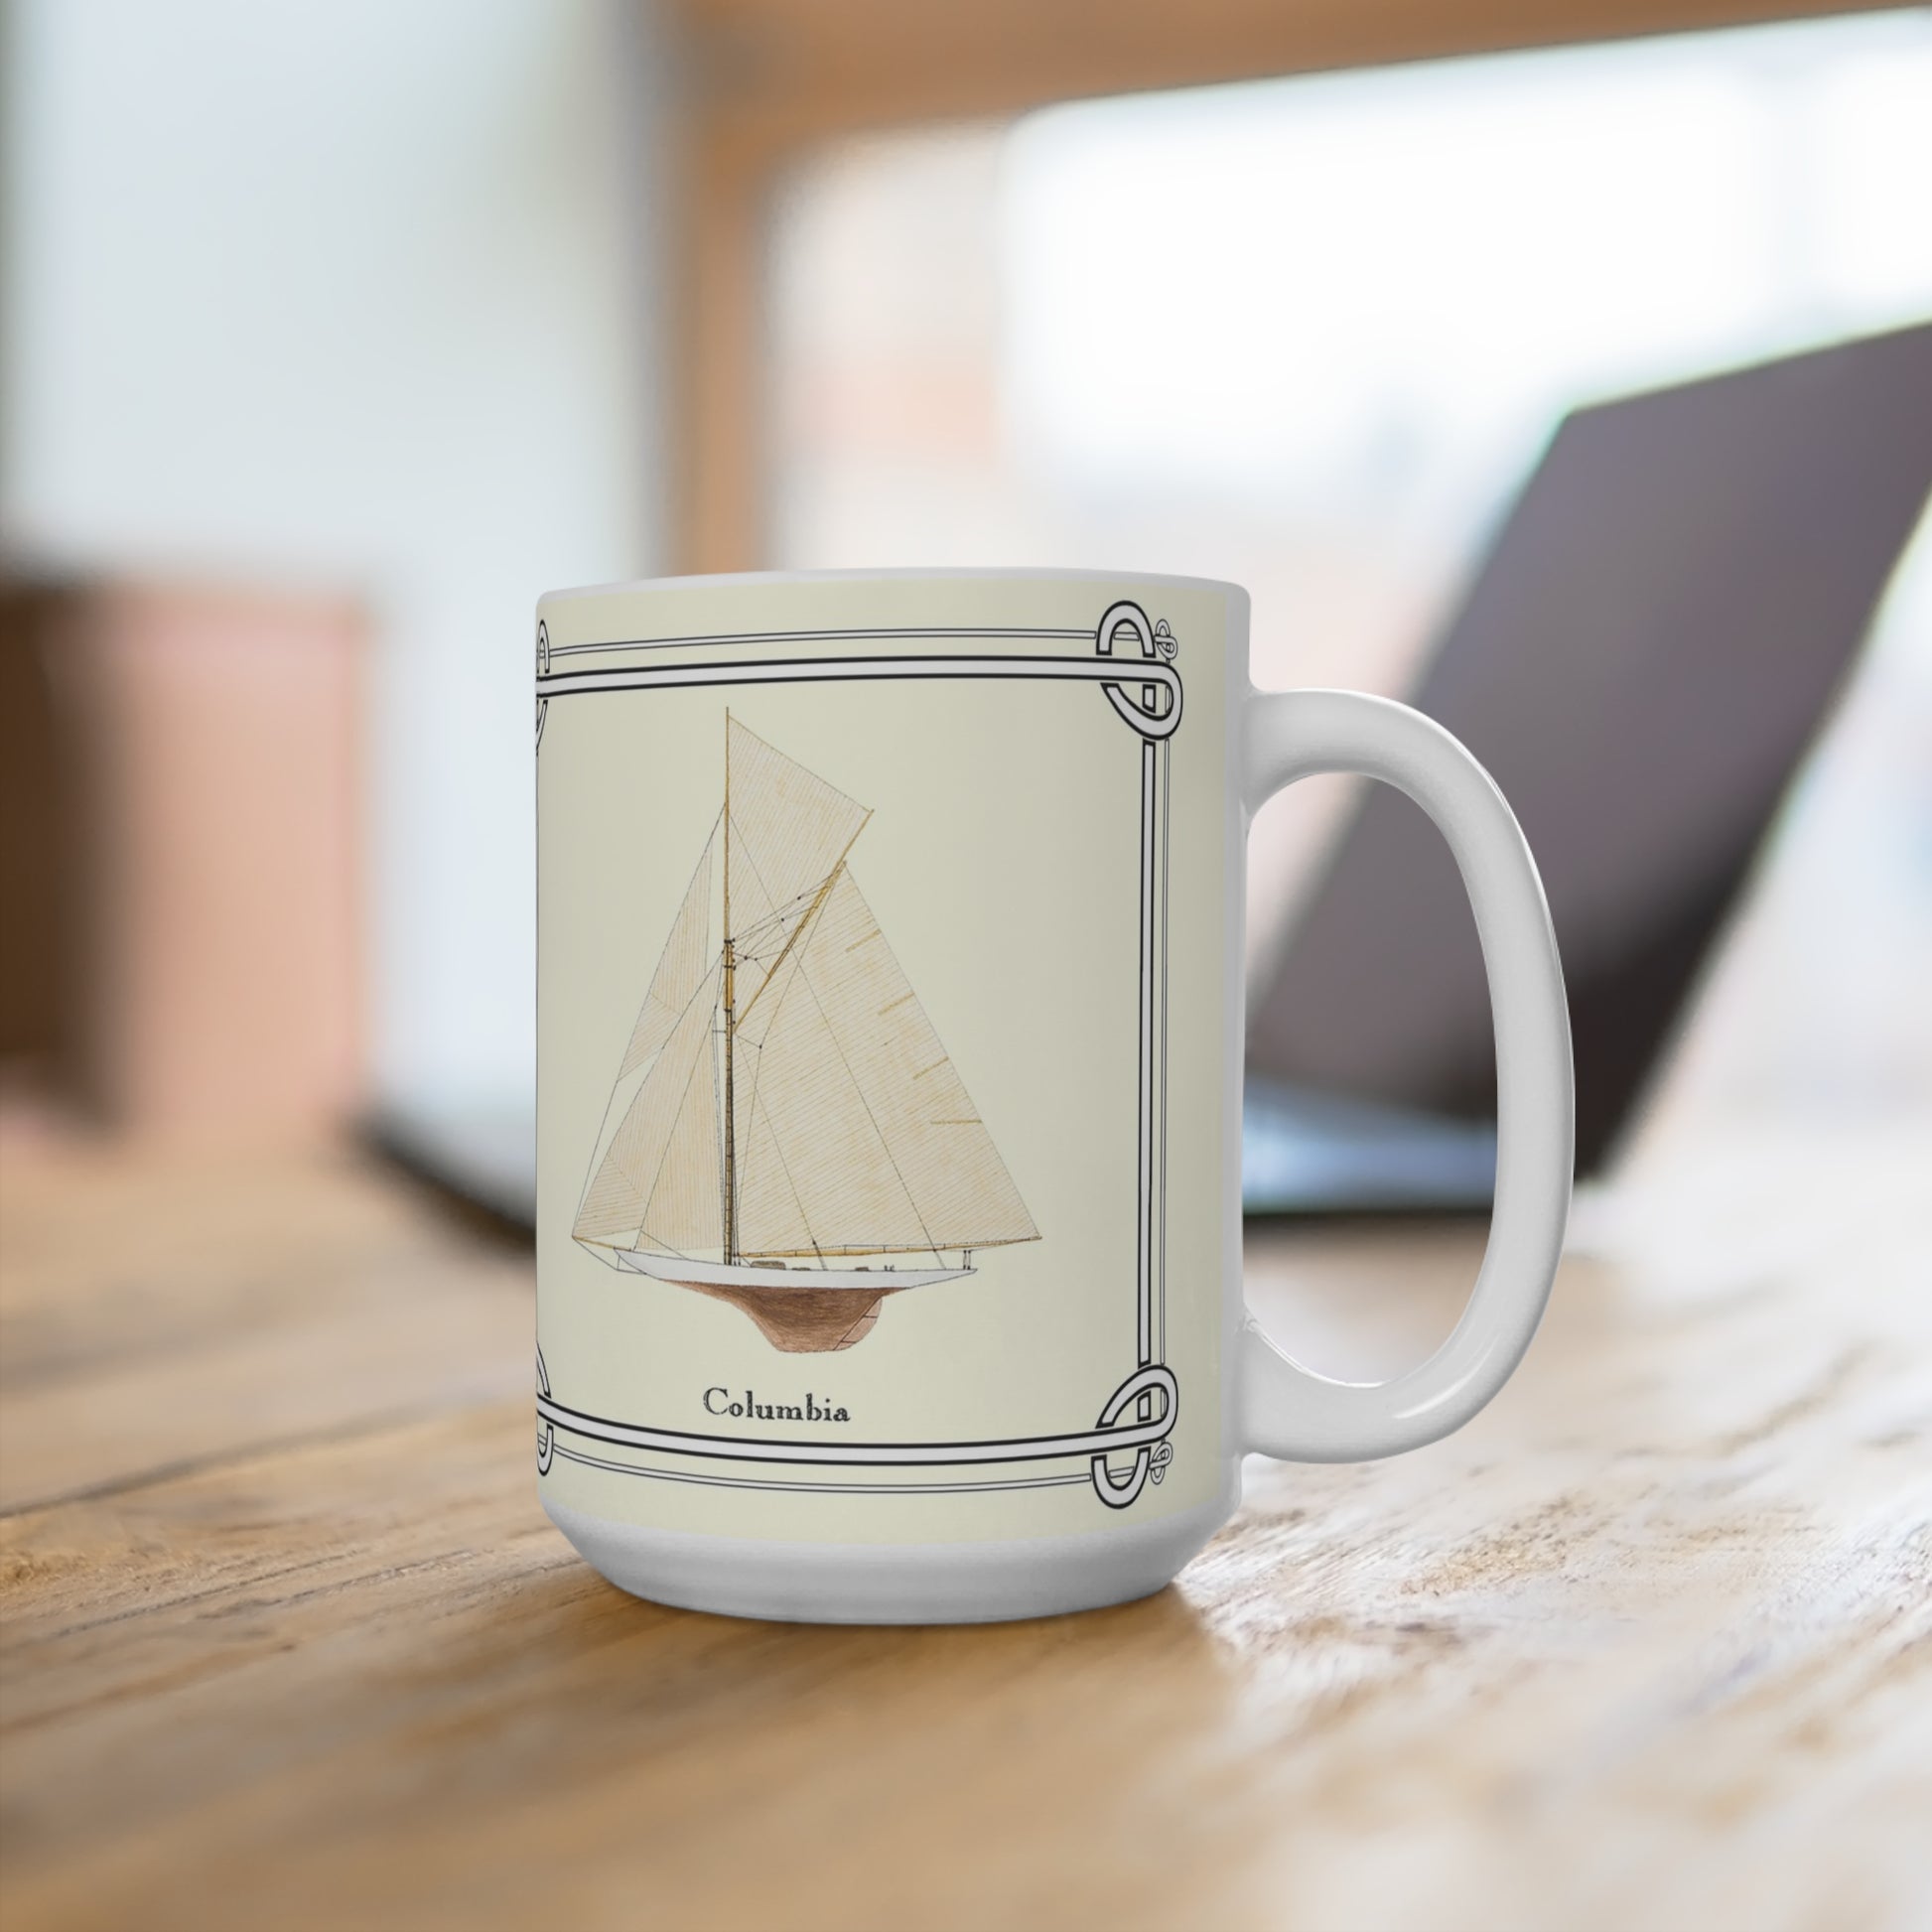 Enjoy your favorite beverage in the Columbia 15 oz. Mug. Perfect for anyone who loves sailing or naval history.